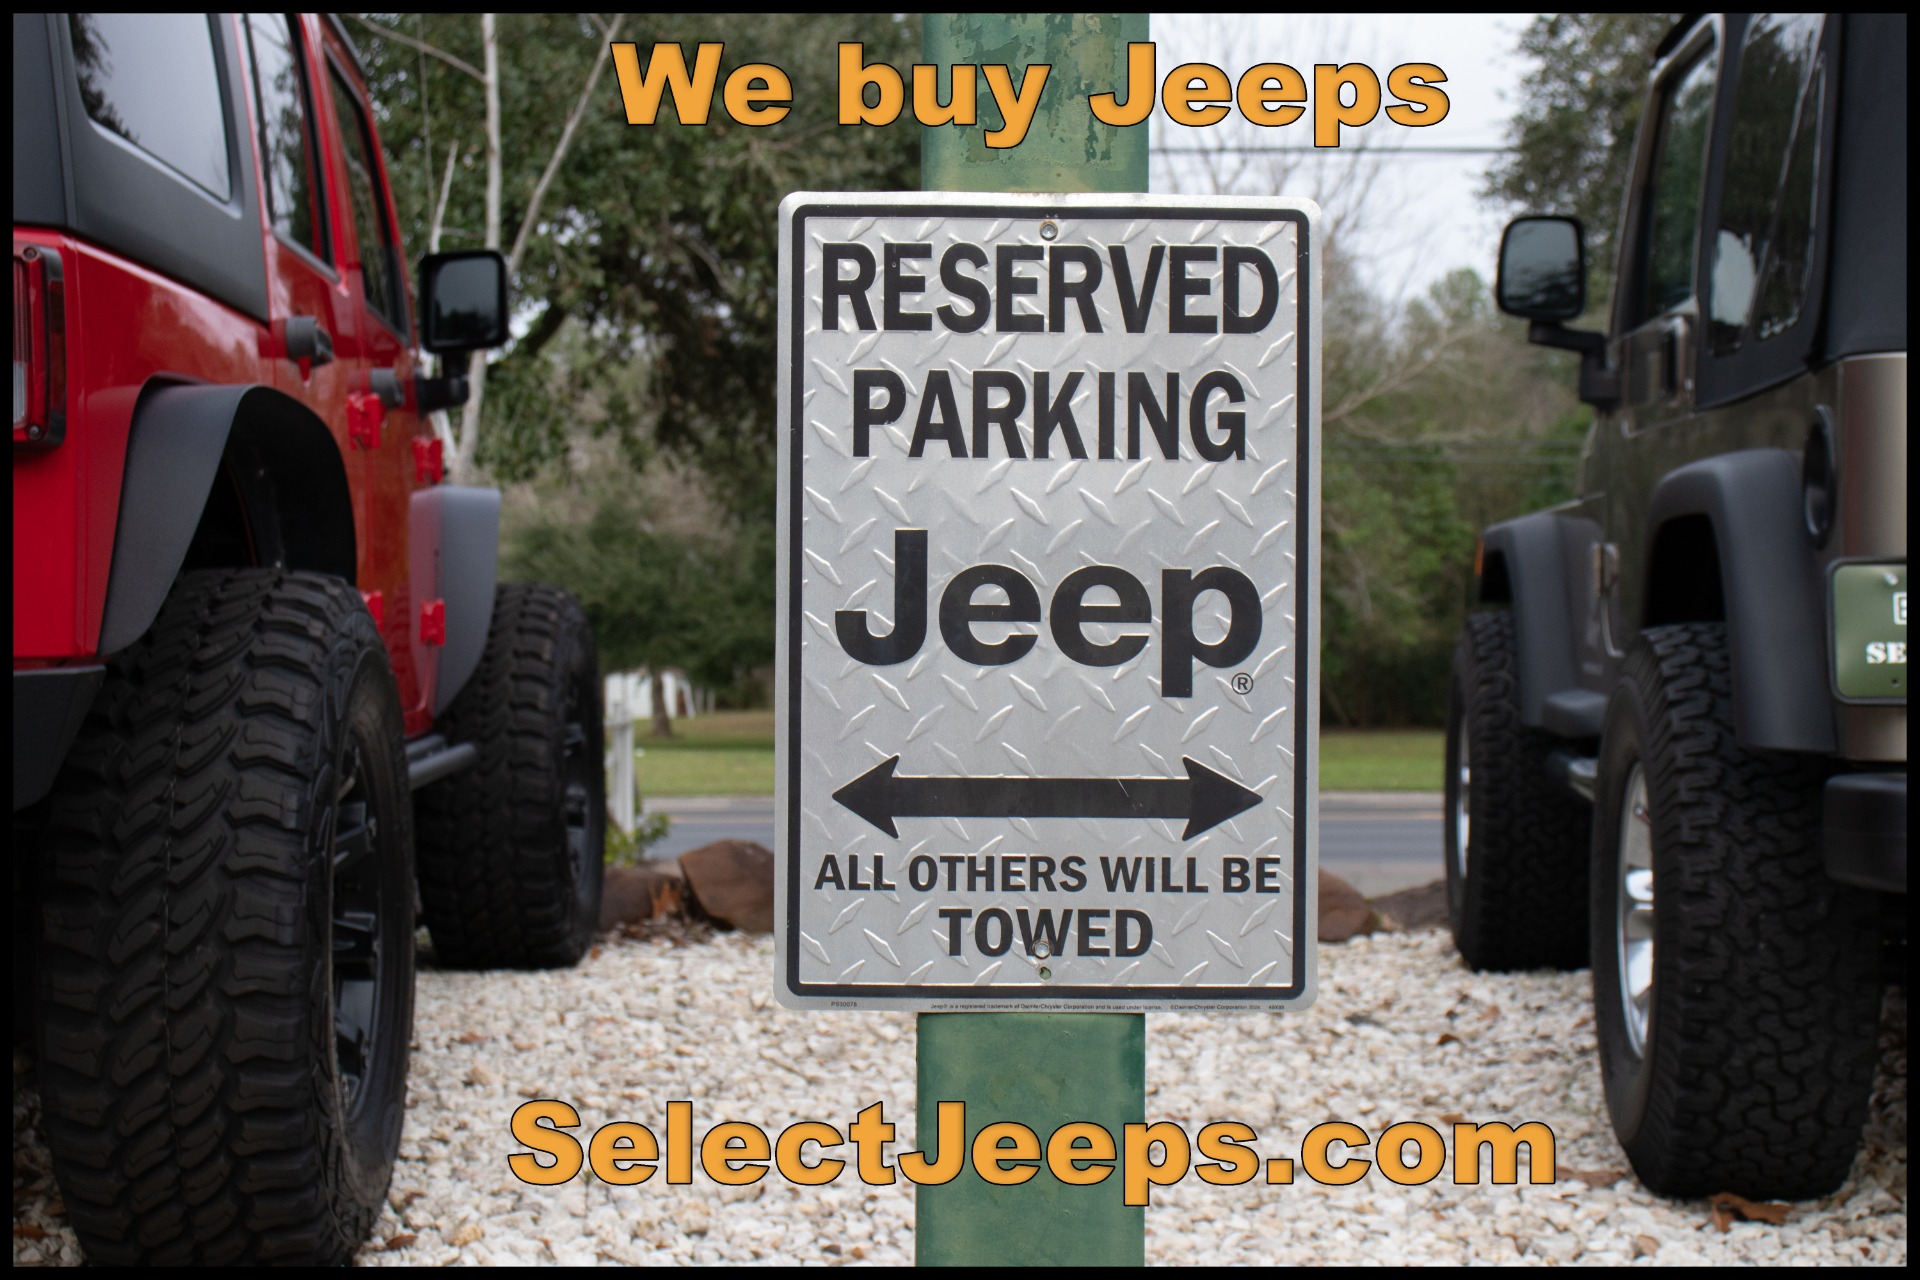 Used 2008 Jeep Wrangler Unlimited Rubicon For Sale 21 995